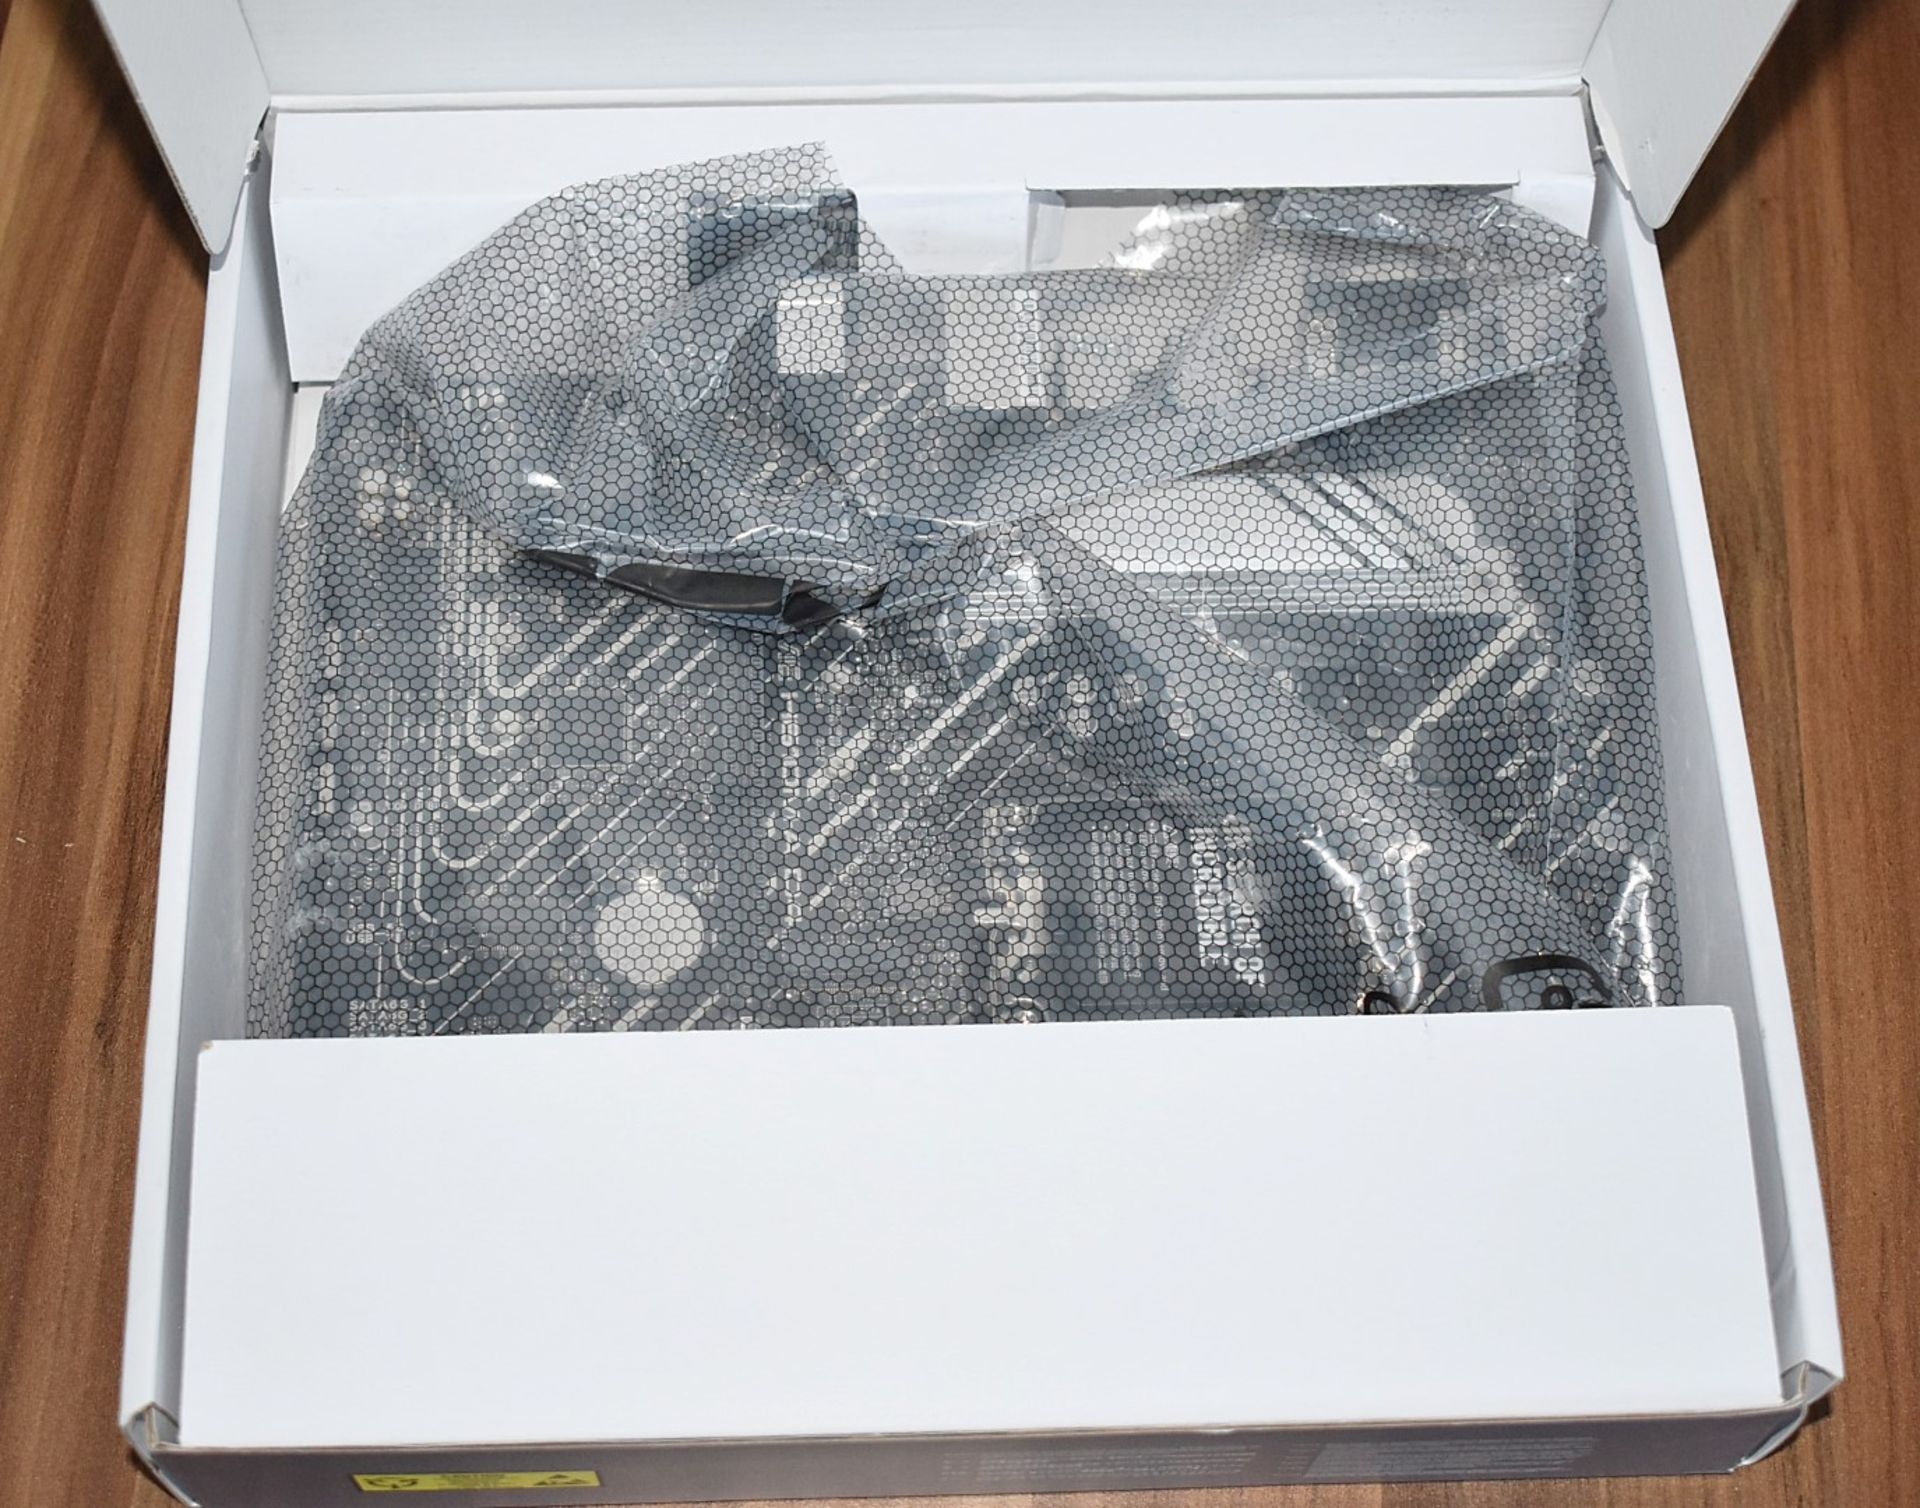 1 x Asus Prime Z610M-A D4 12th Gen Intel LGA1700 Micro ATX Motherboard - Open Boxed Stock - Image 2 of 2